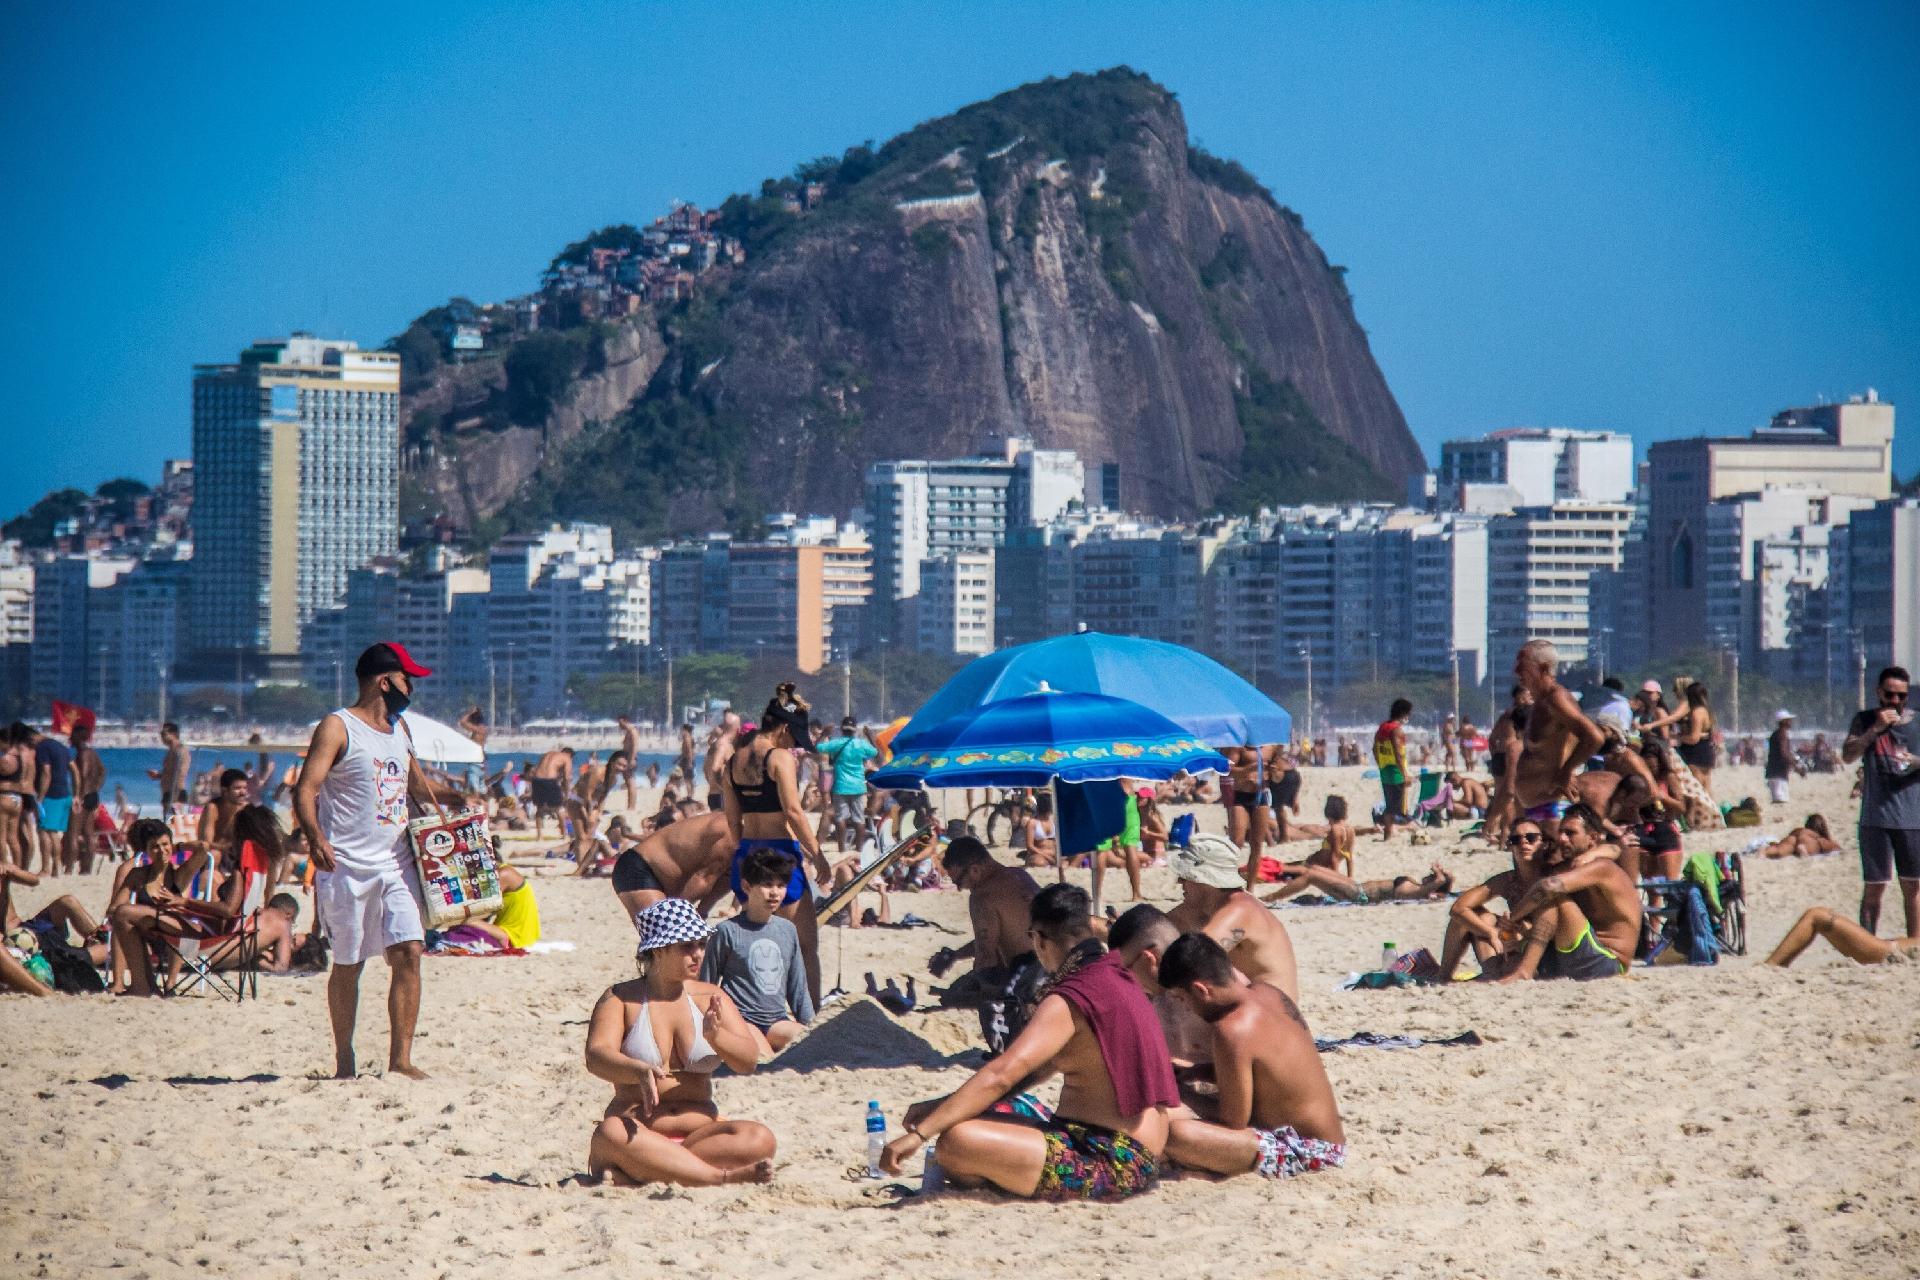 As for the long weekend, Rio is likely to experience hot weather. Between Saturday, September 5th and Monday, September 7th, Brazil's Independence Day, the forecast is for sun with the presence of clouds, but no rain.